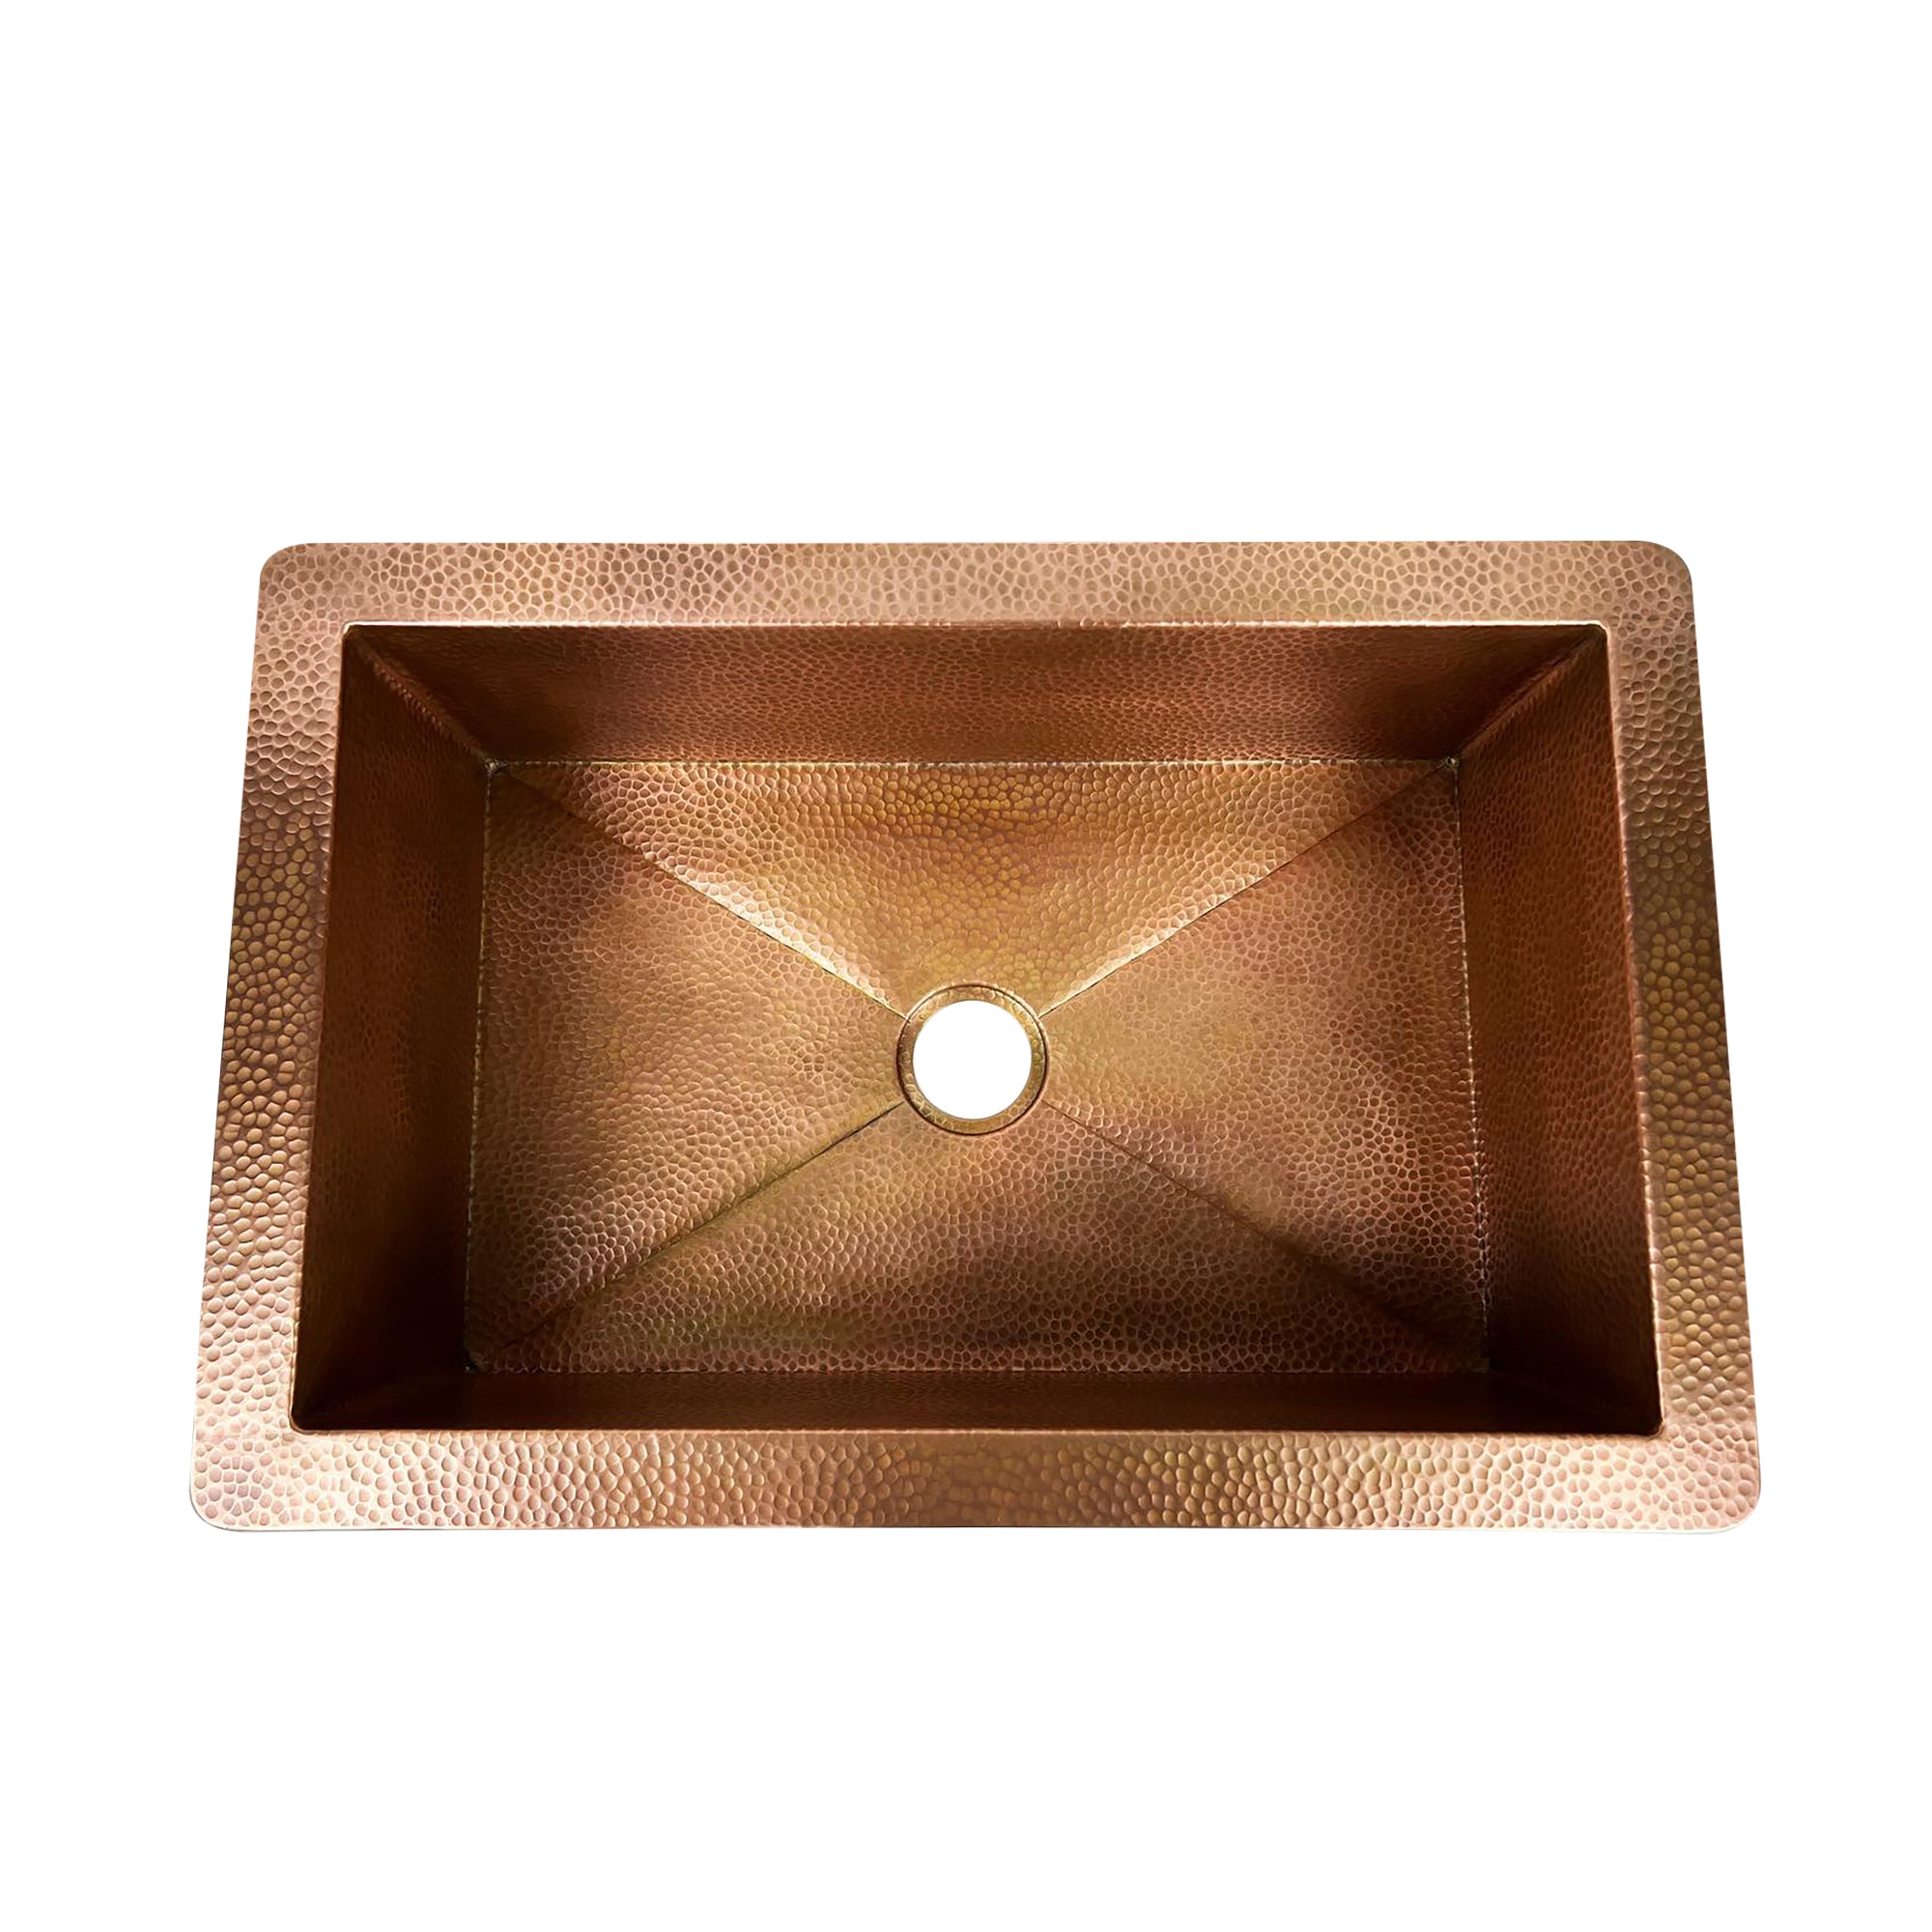 Hammered Copper Double Bowl Farmhouse Sink 